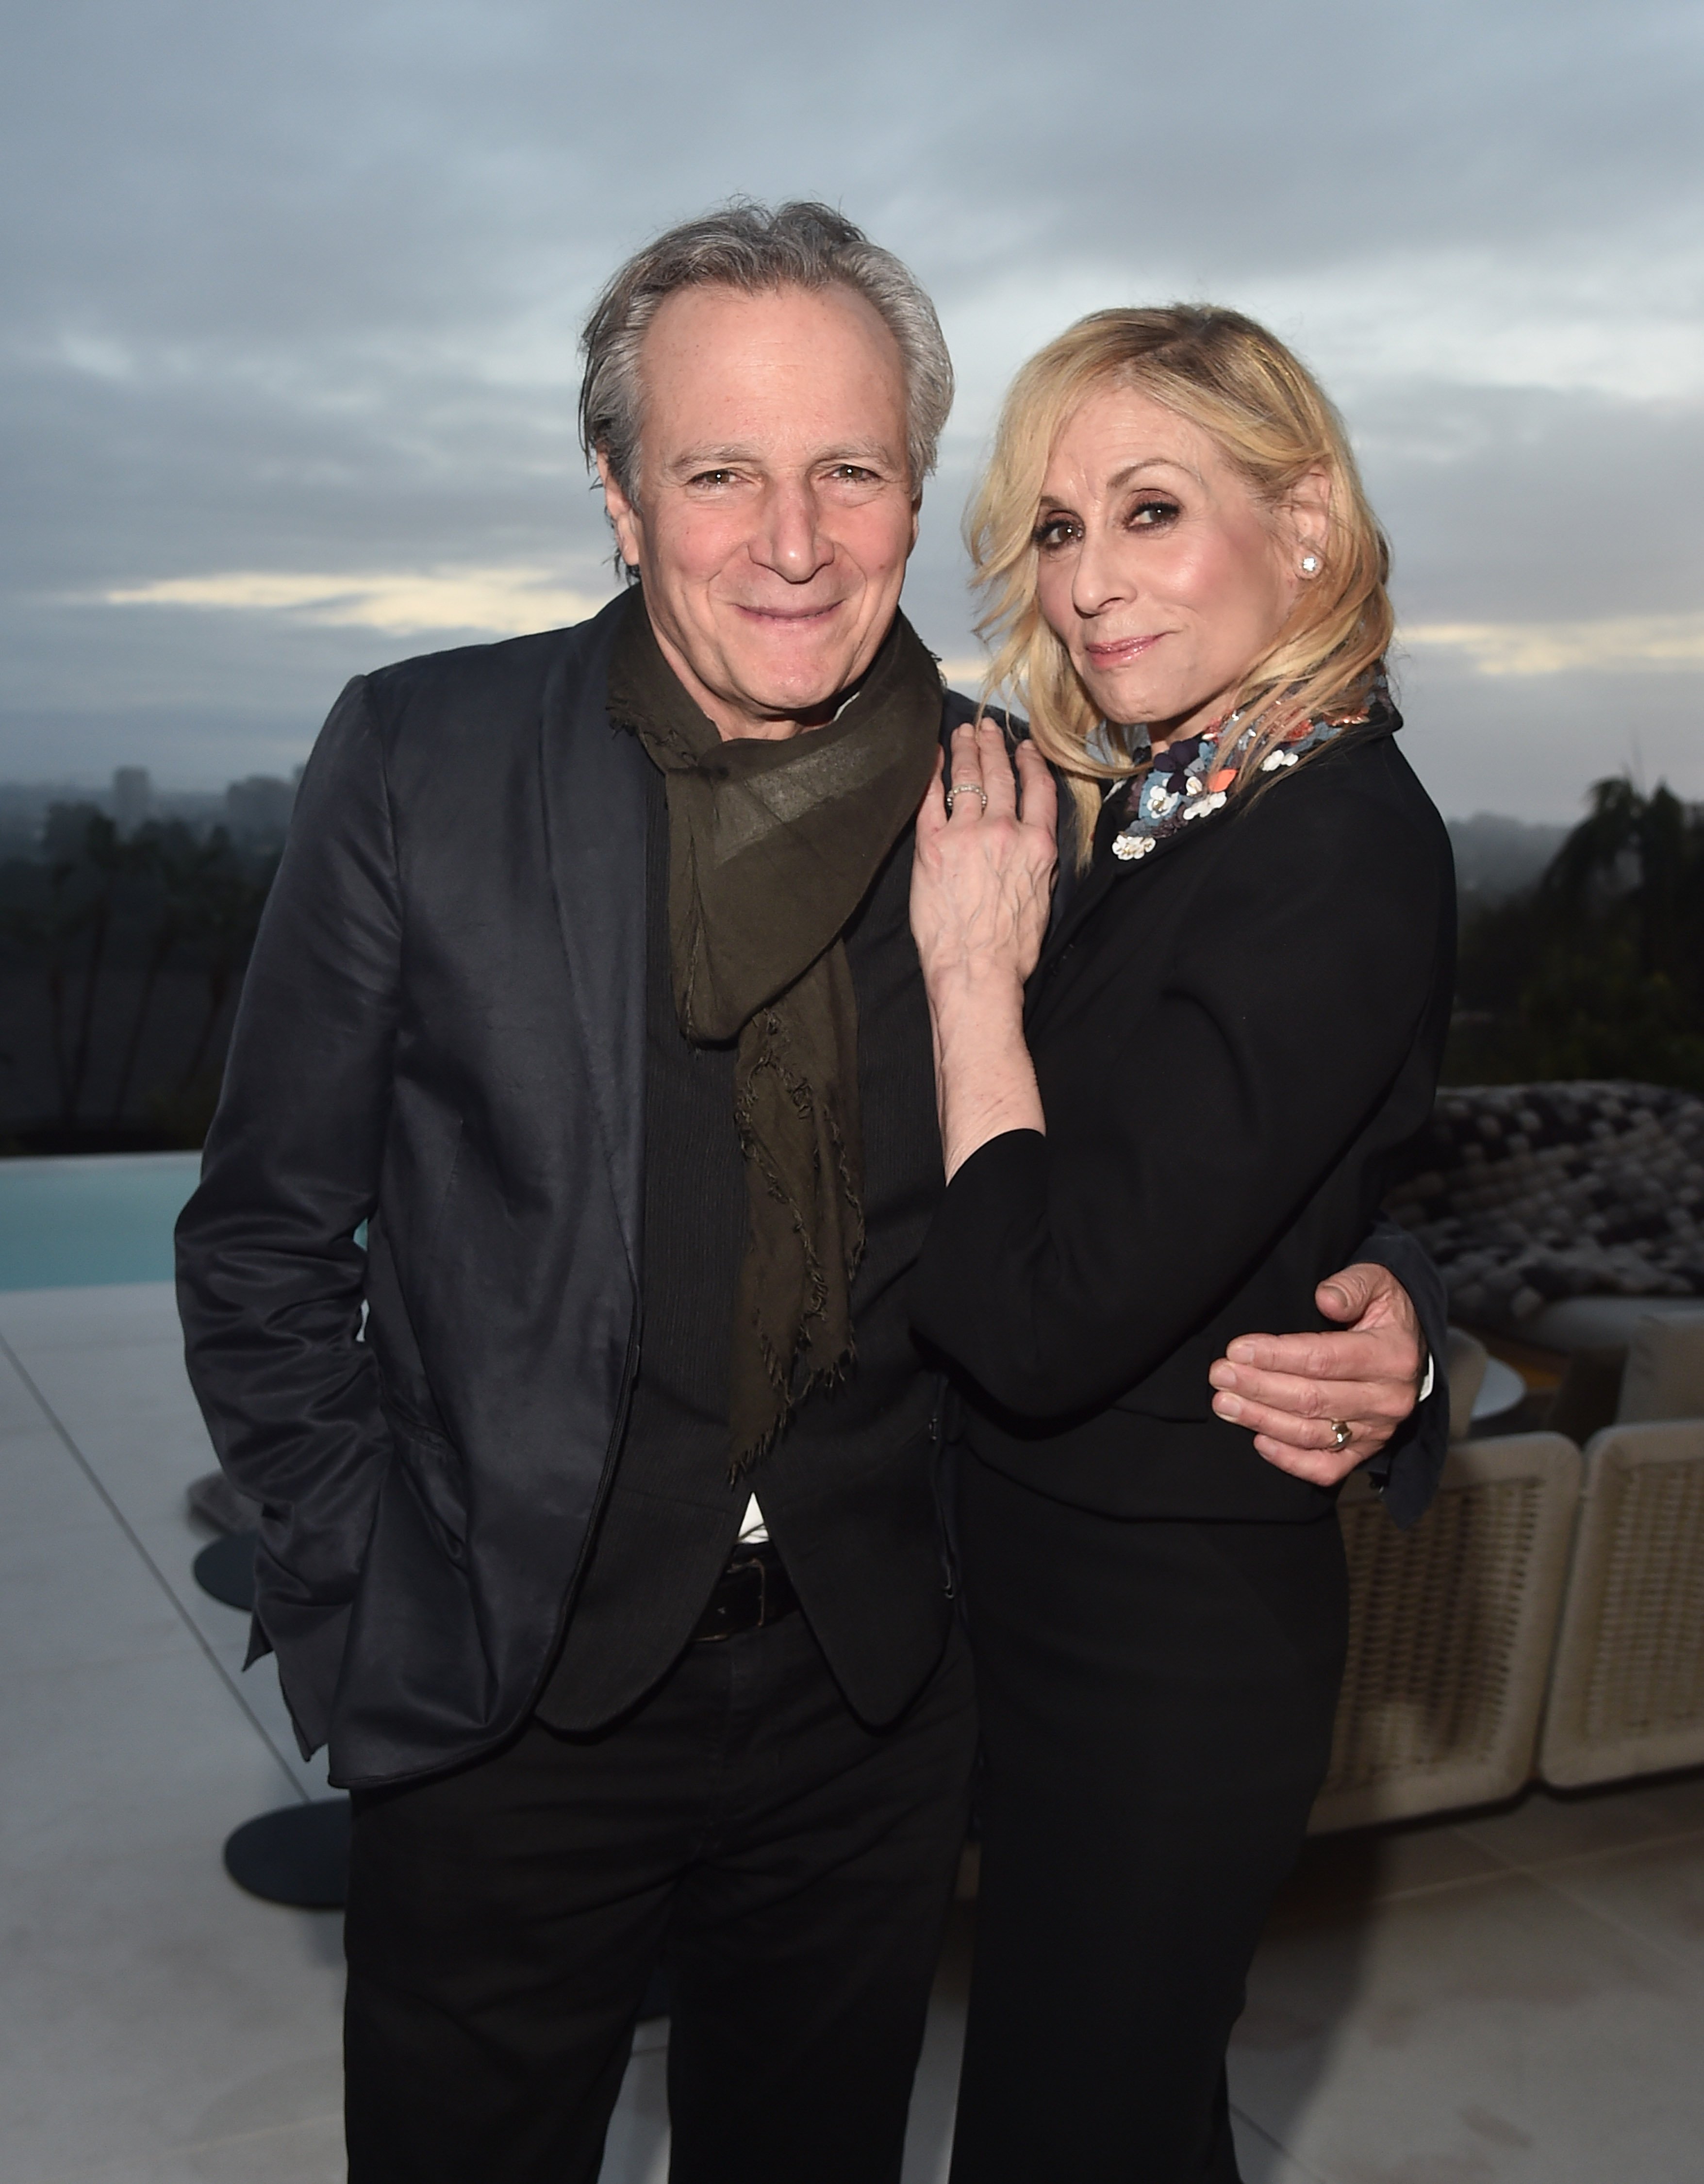 Robert Desiderio and Judith Light attend a cocktail party to celebrate EJAF, the 90th Academy Awards, and to honor Chef Joan Roca on March 2, 2018 in Beverly Hills, California | Source: Getty Images